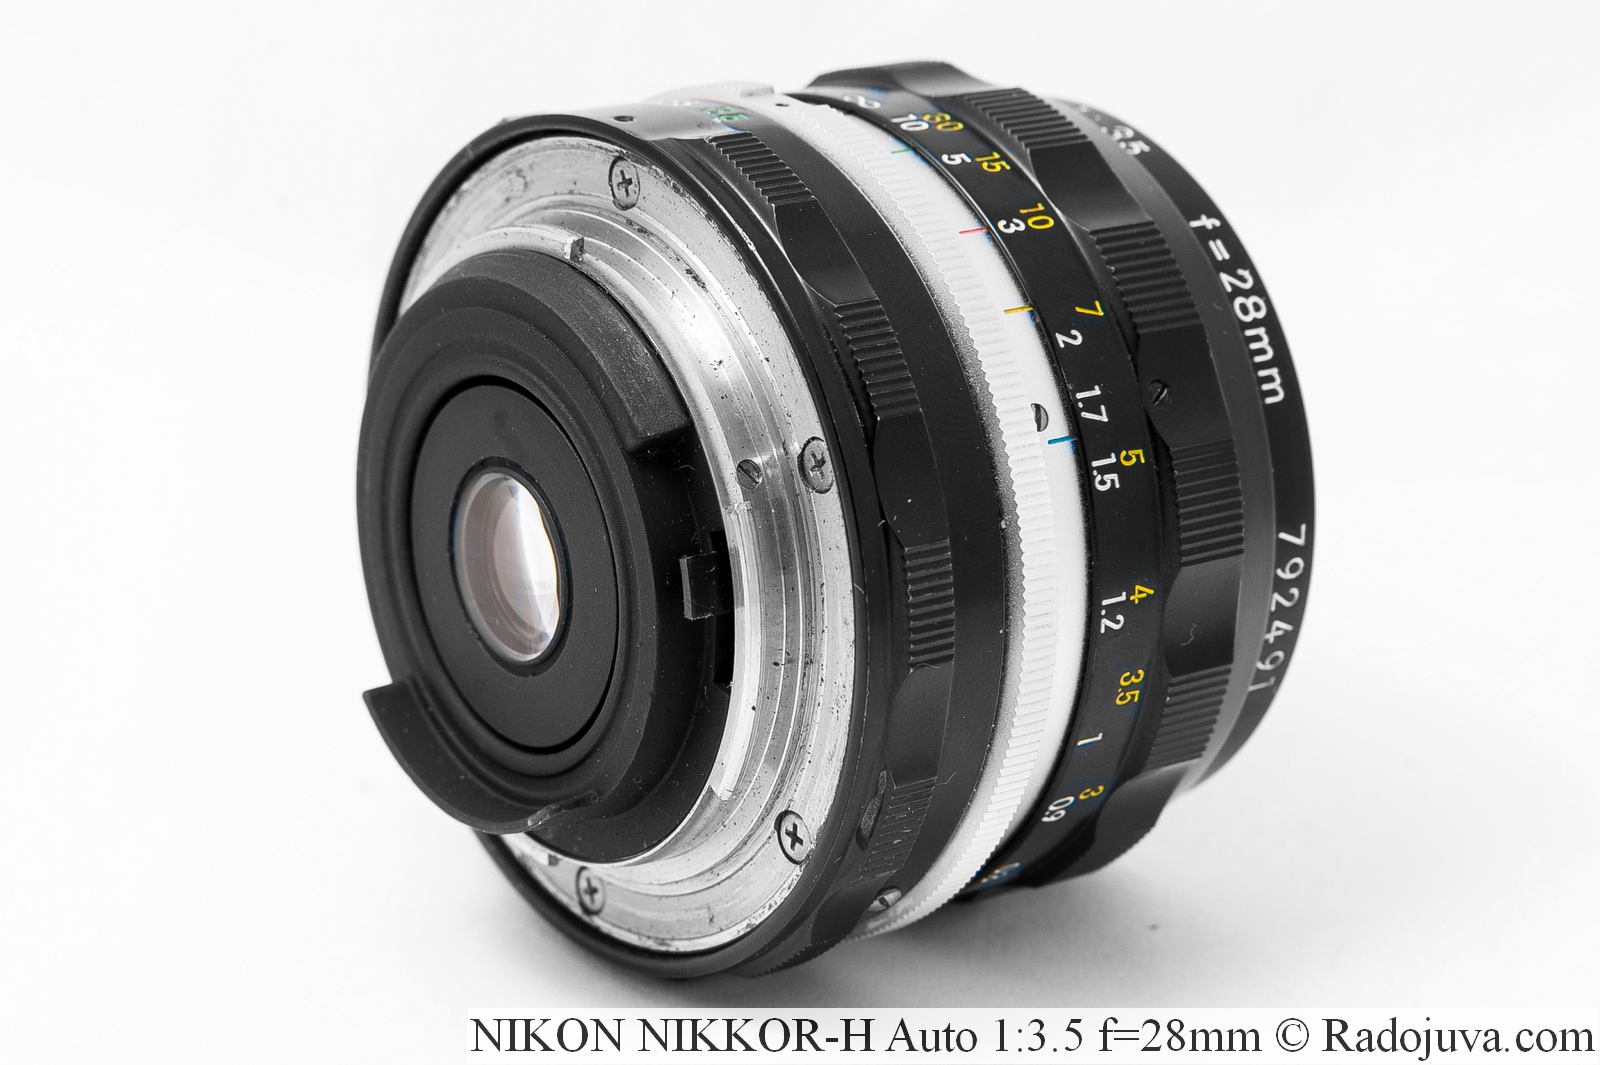 Review of NIKON NIKKOR-H Auto 1: 3.5 f = 28mm | Happy